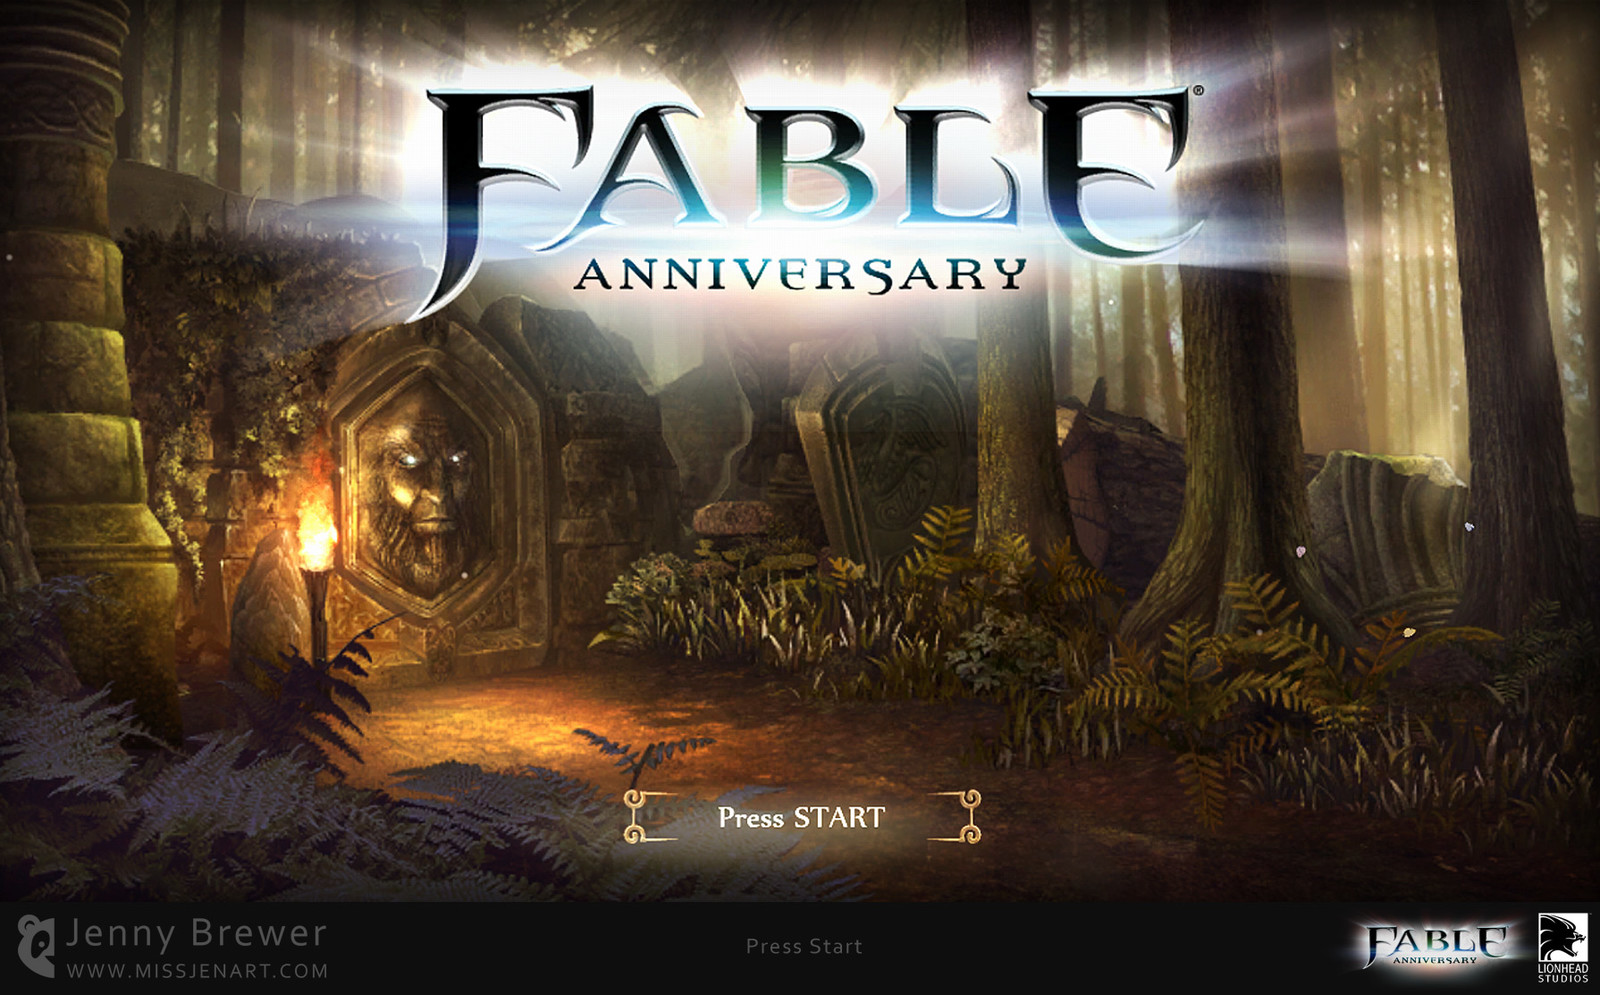 One of the first screens players are greeted with in Fable Anniversary is the Press Start screen.  There are 4 possible scenes which are randomly displayed each time you load the game, each with their own subtle animations to bring the environment to life